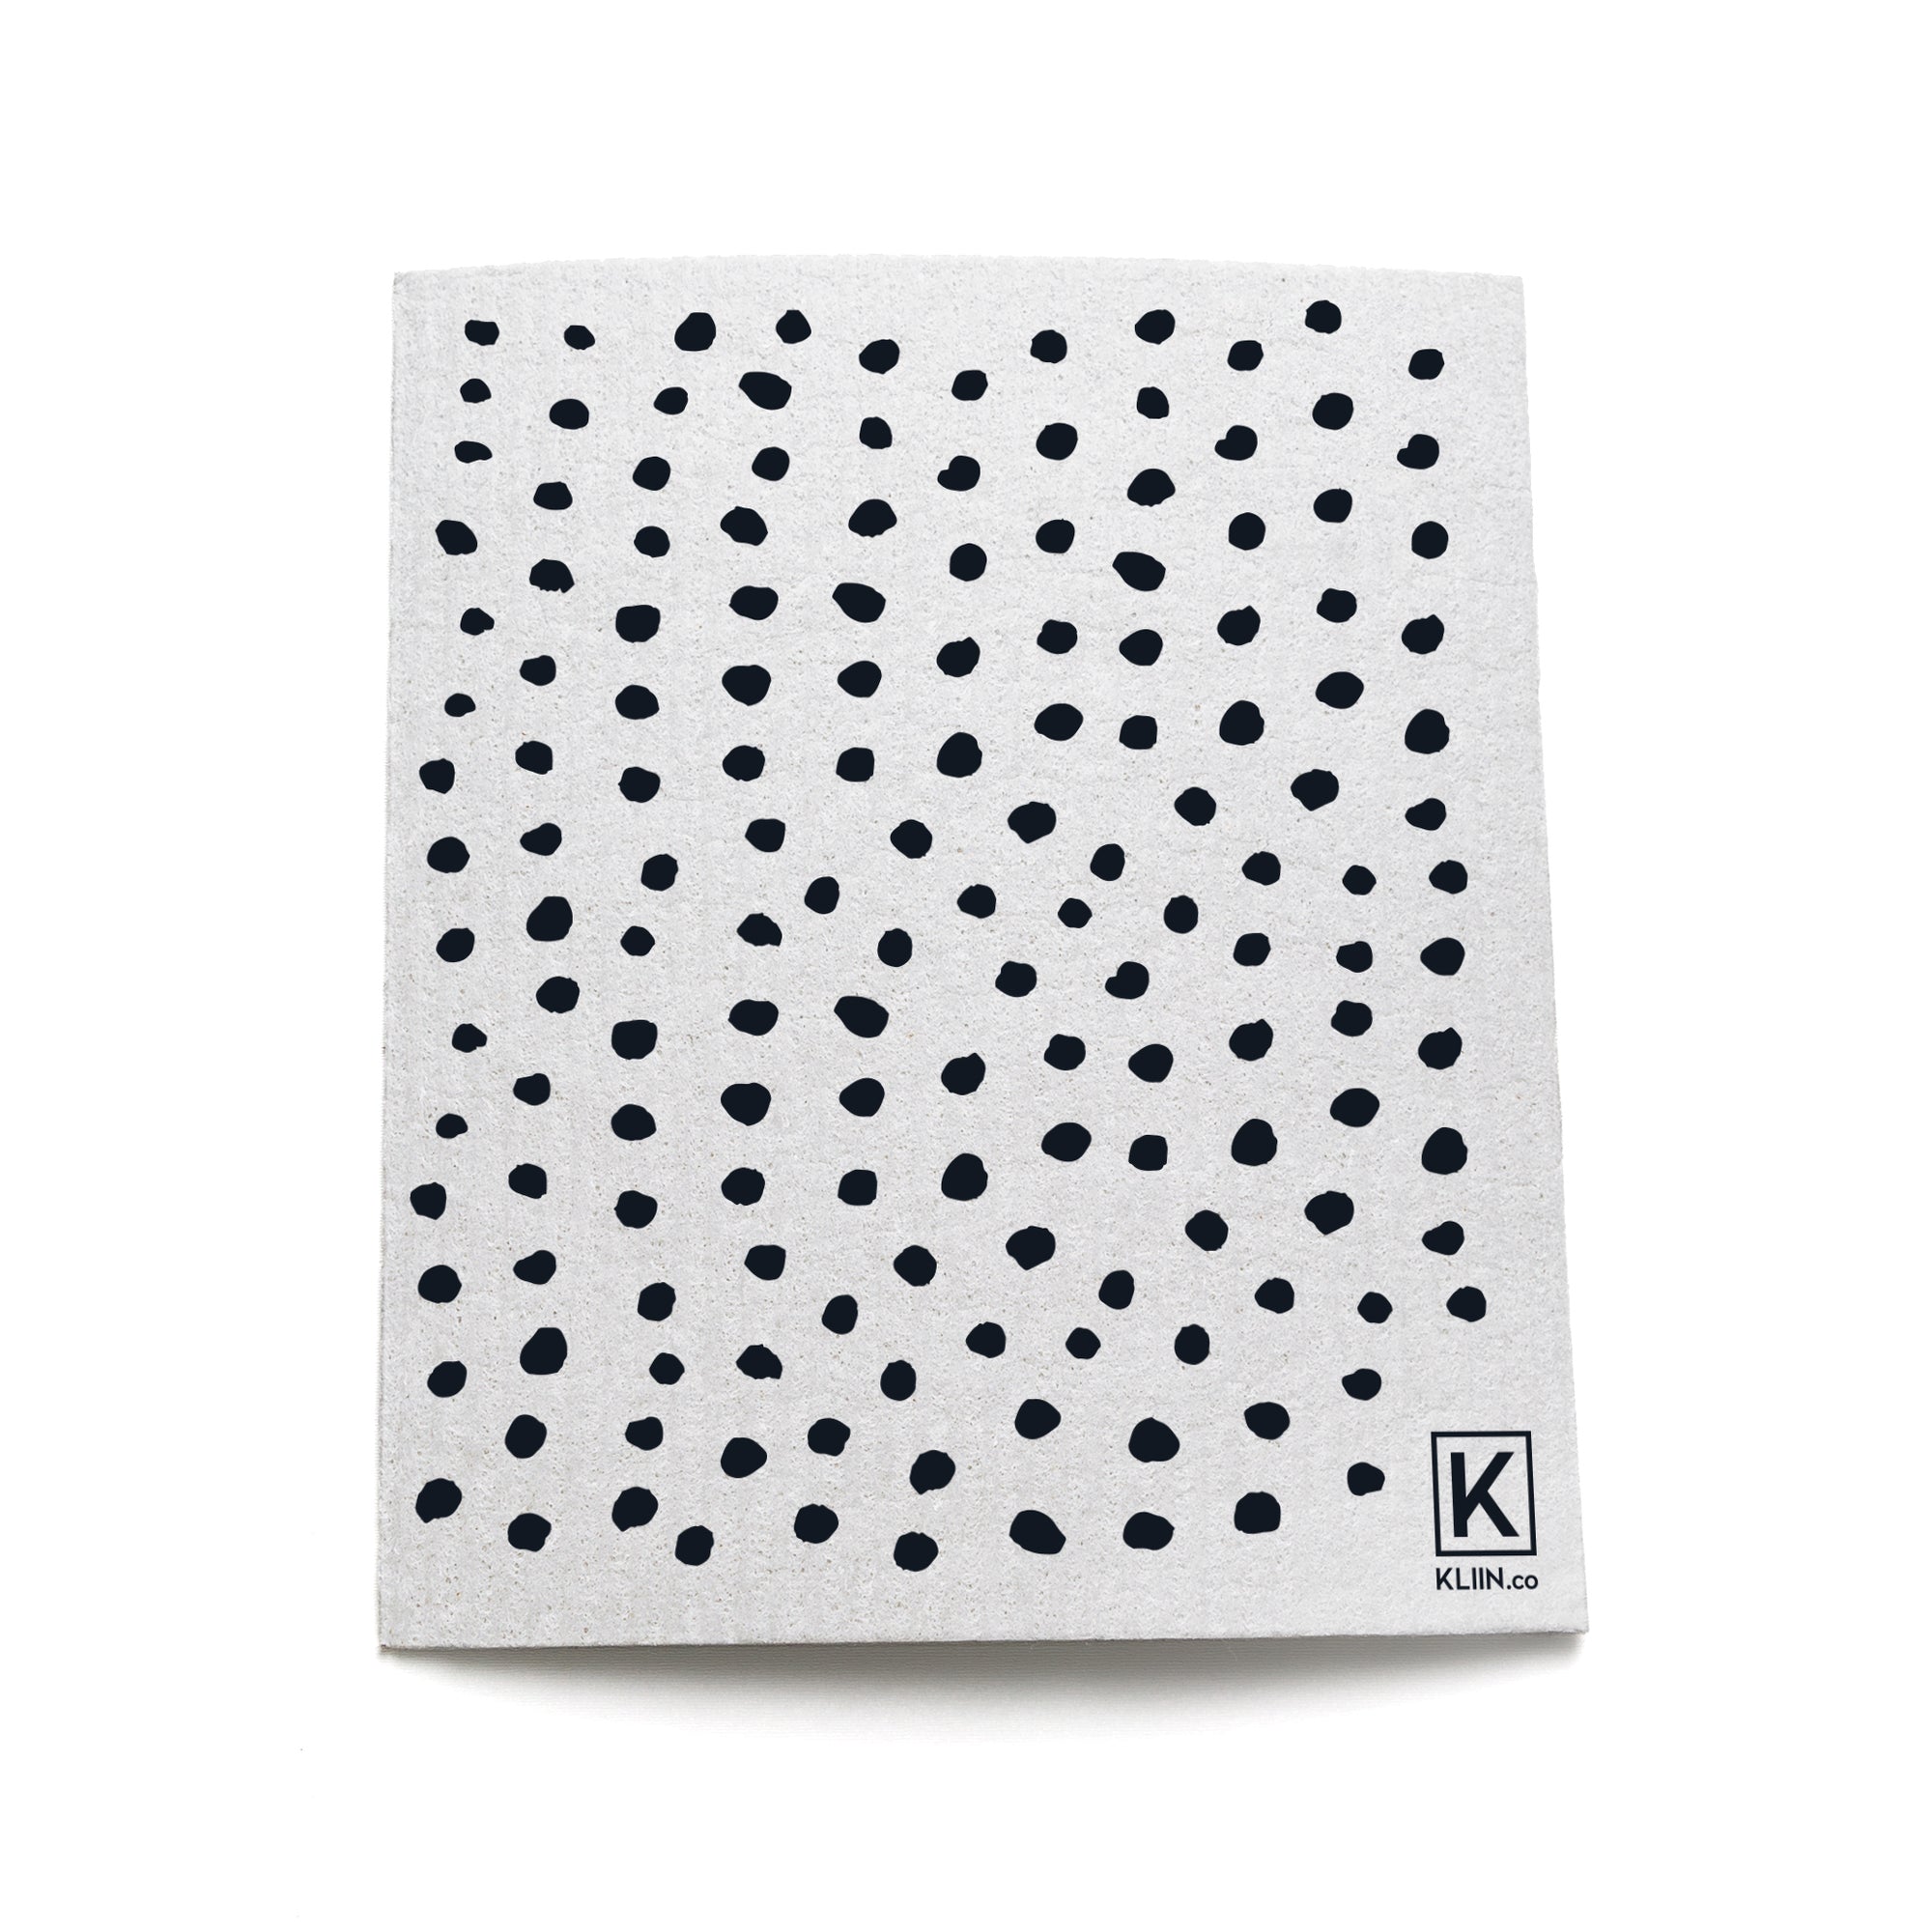 Small reusable and compostable paper towel - White Dots